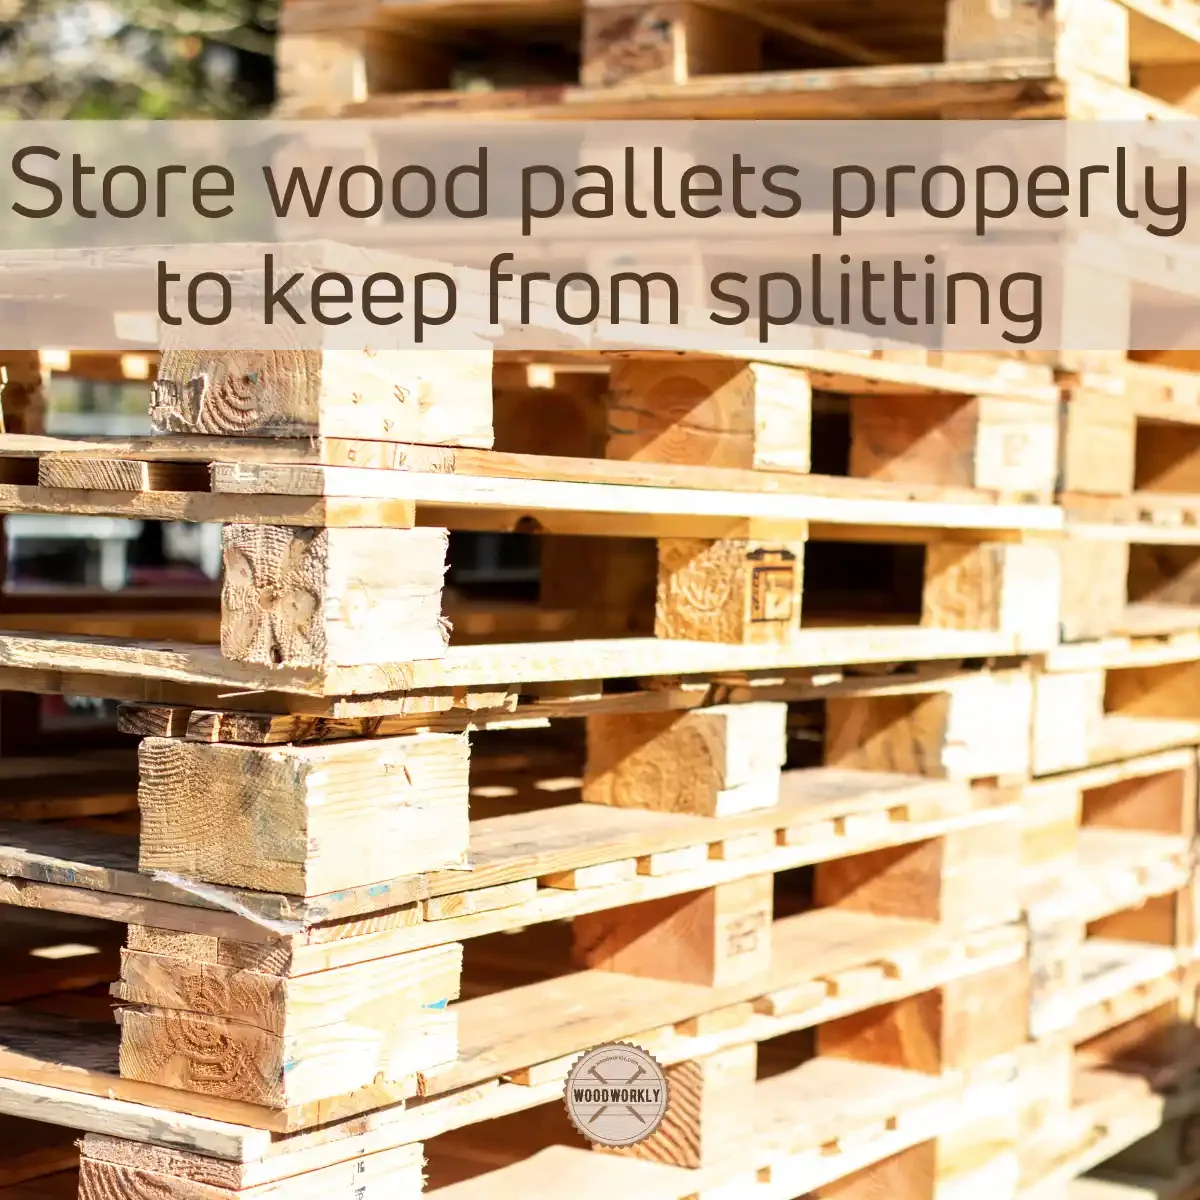 Store wood pallets properly to keep from splitting